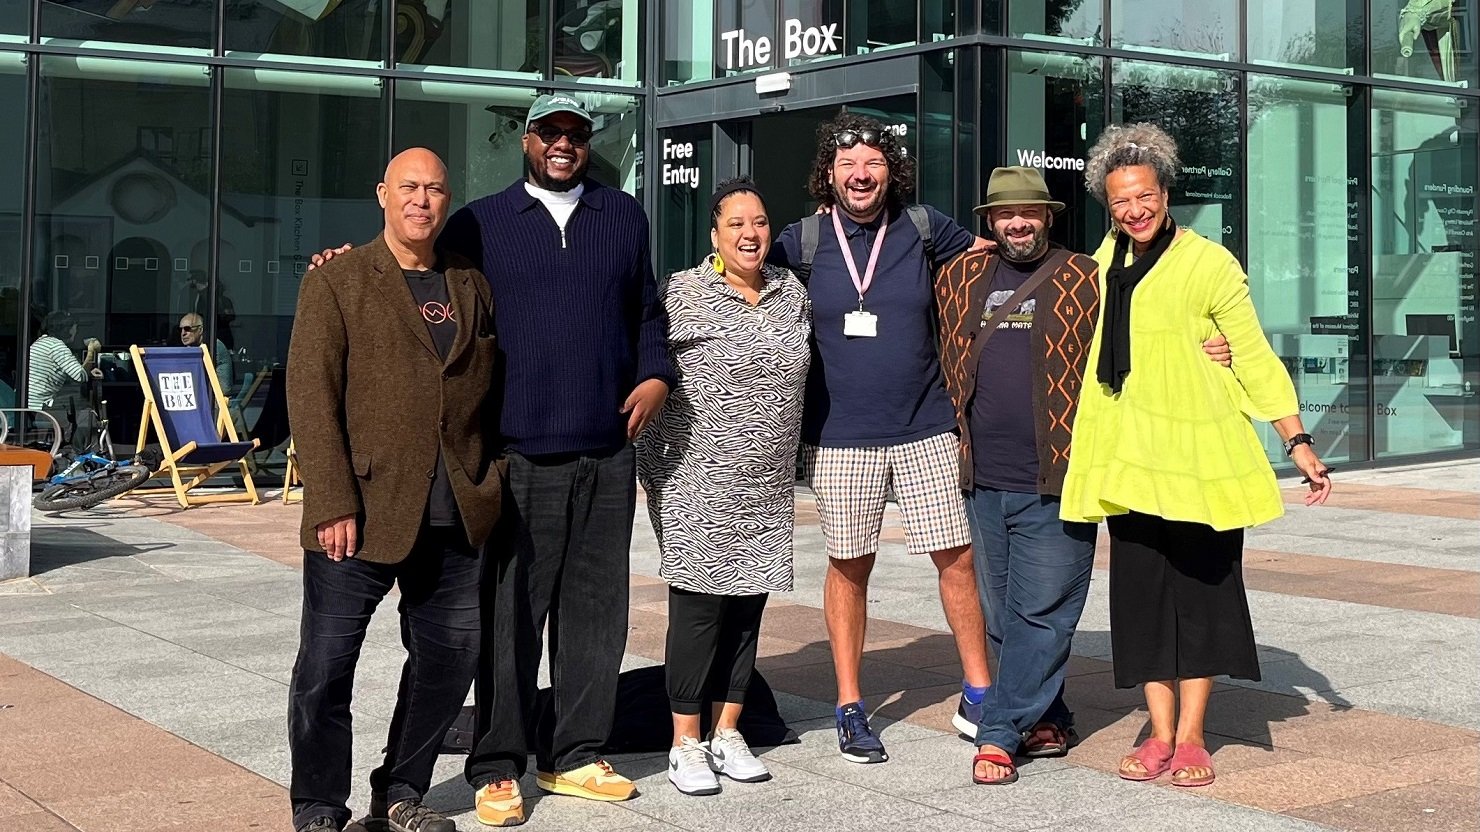 The Box secures Lottery funding to research the South West’s Windrush connections | The Box Plymouth